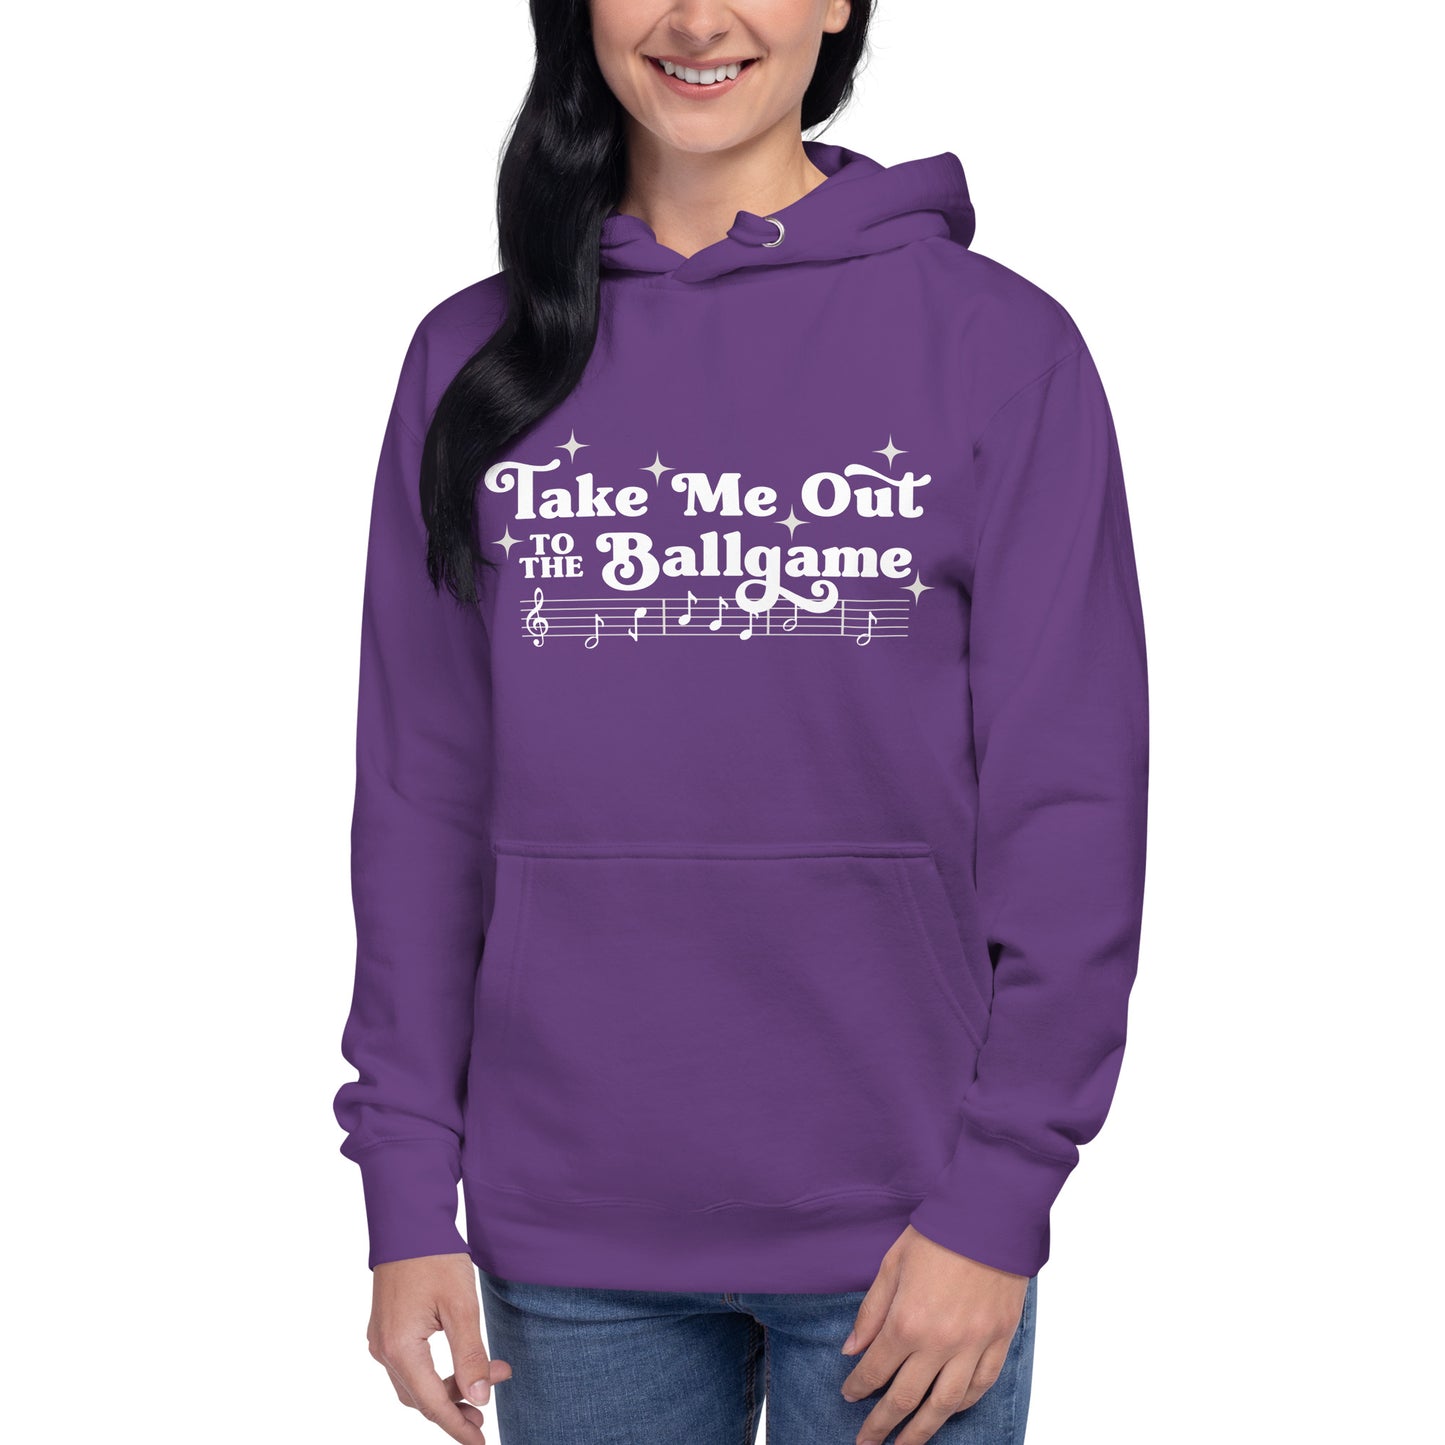 Image of woman wearing purple hoodie with design of "Take Me Out to the Ballgame" with coordinating musical notes in white located on centre chest. This design is exclusive to Tailgate Mercantile and available only online.